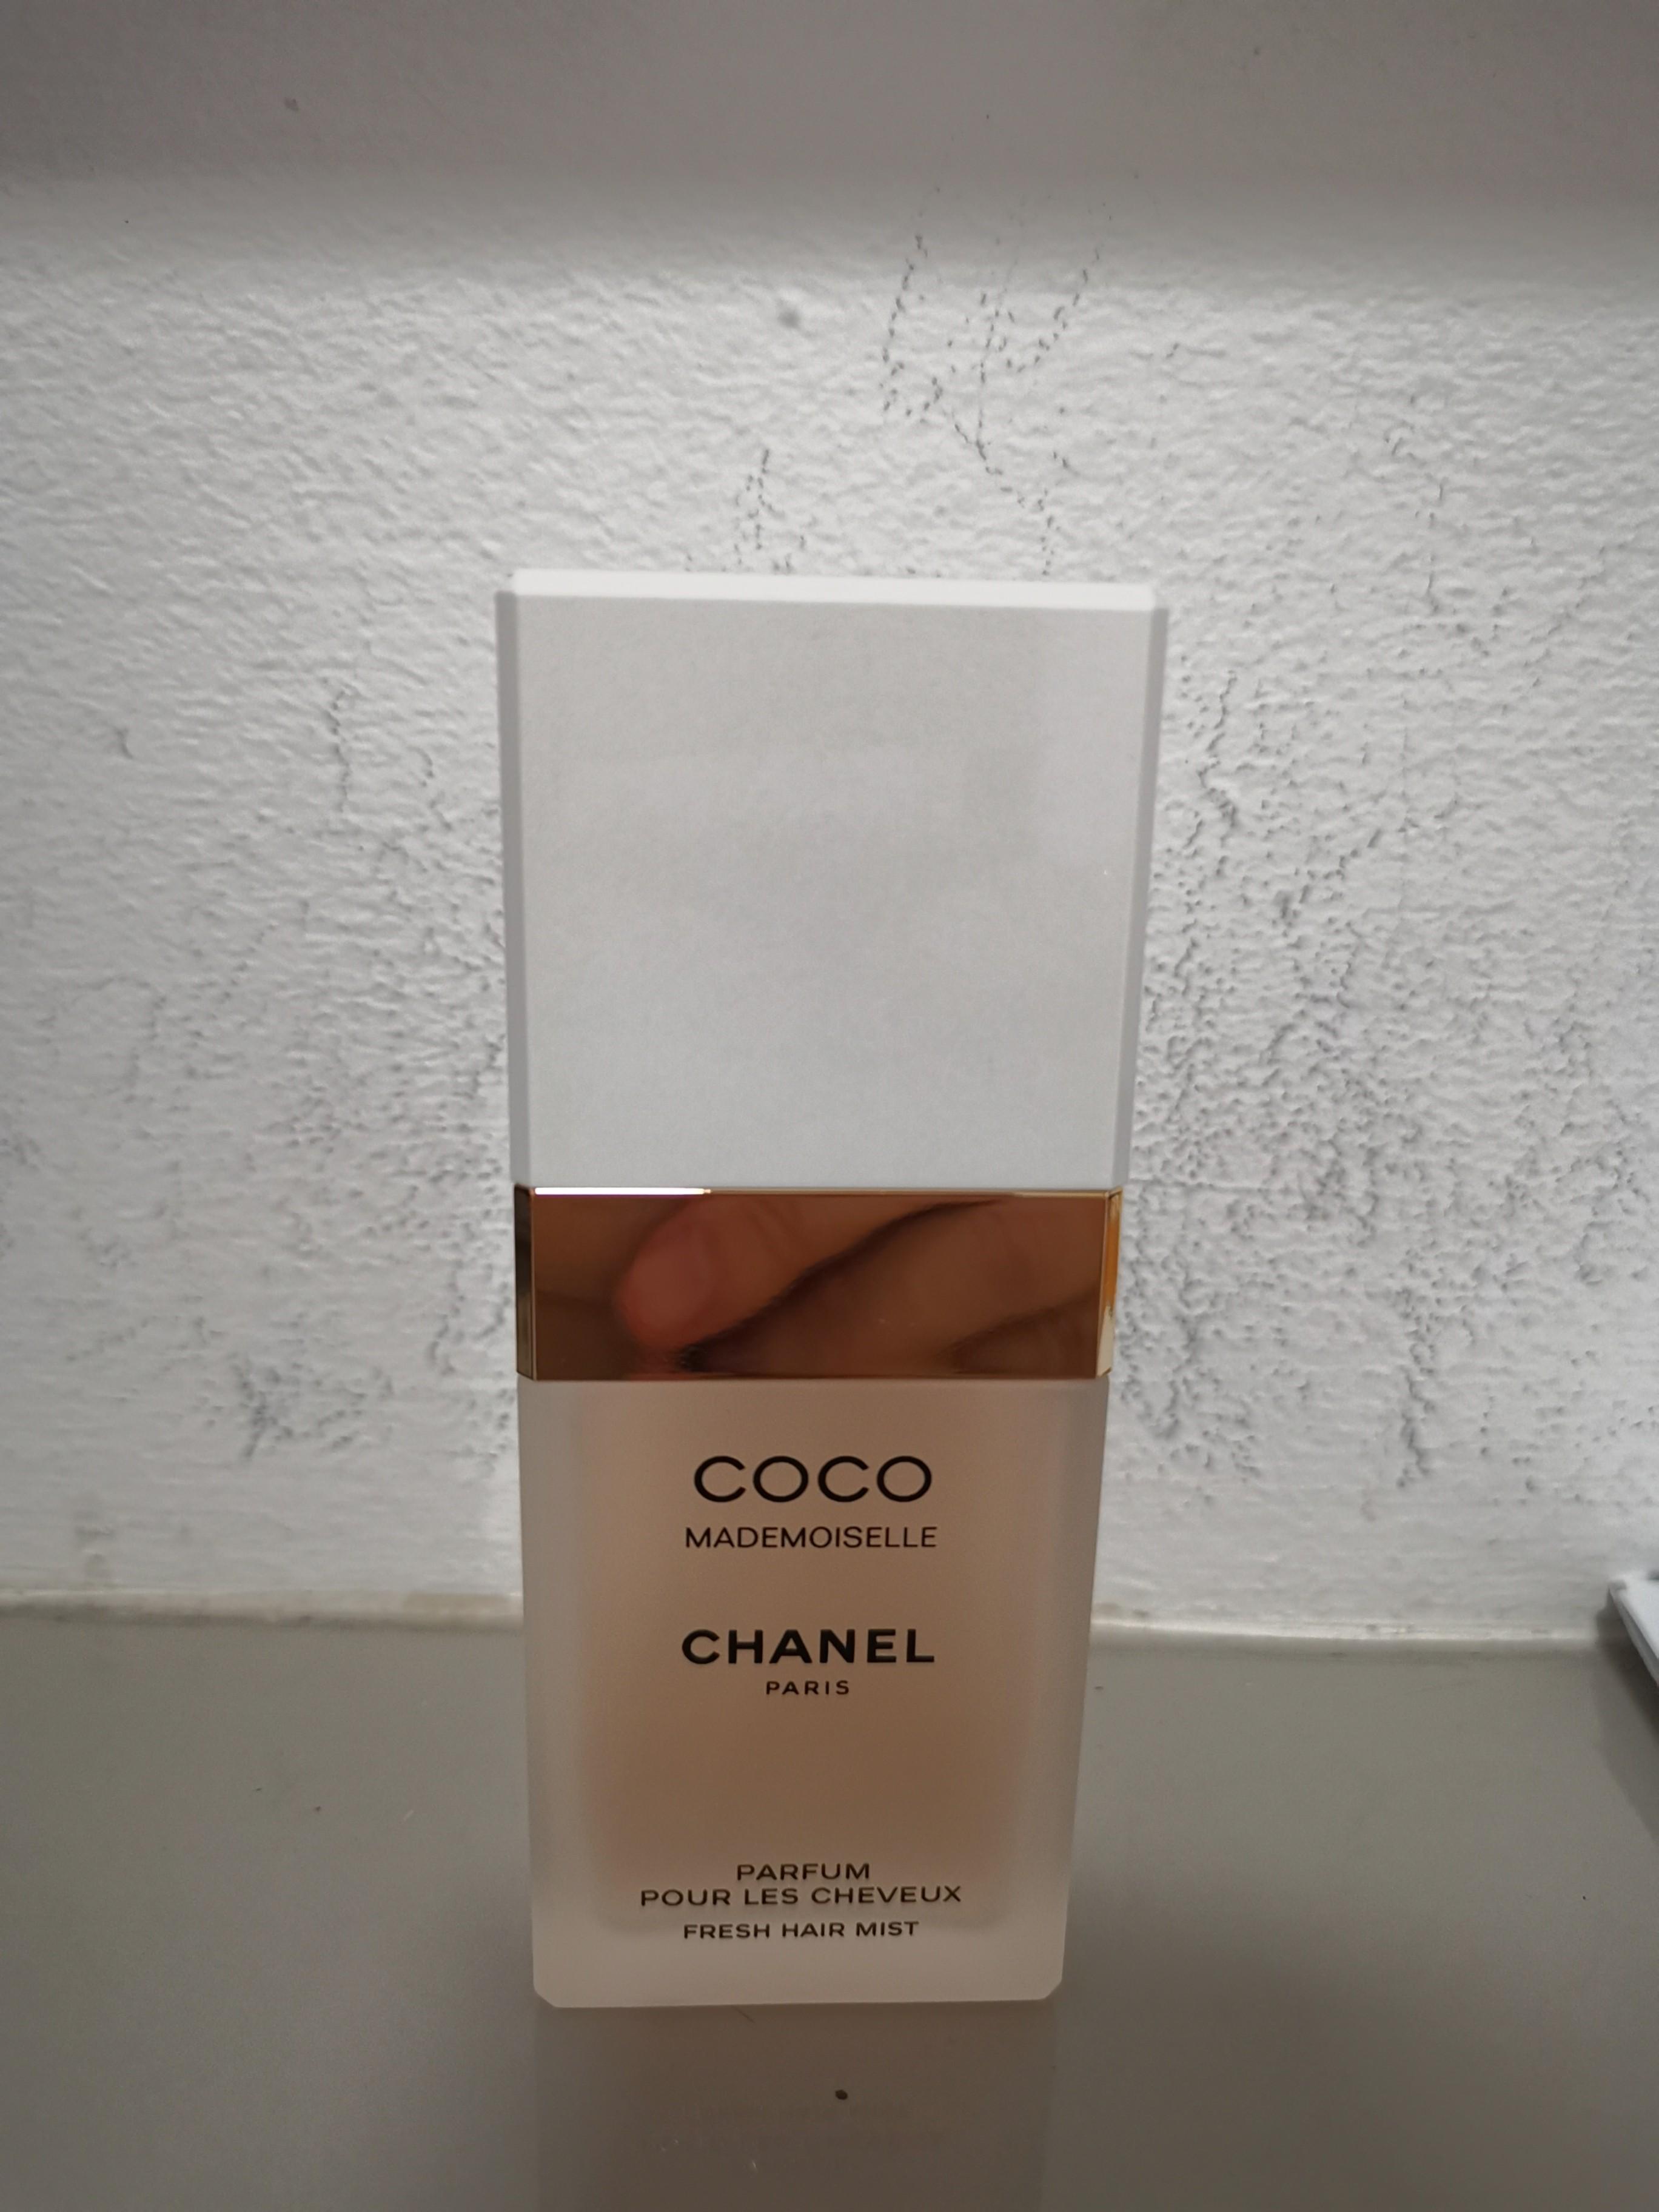 Lippy in London  Chanel Coco Mademoiselle Hair Mist Review